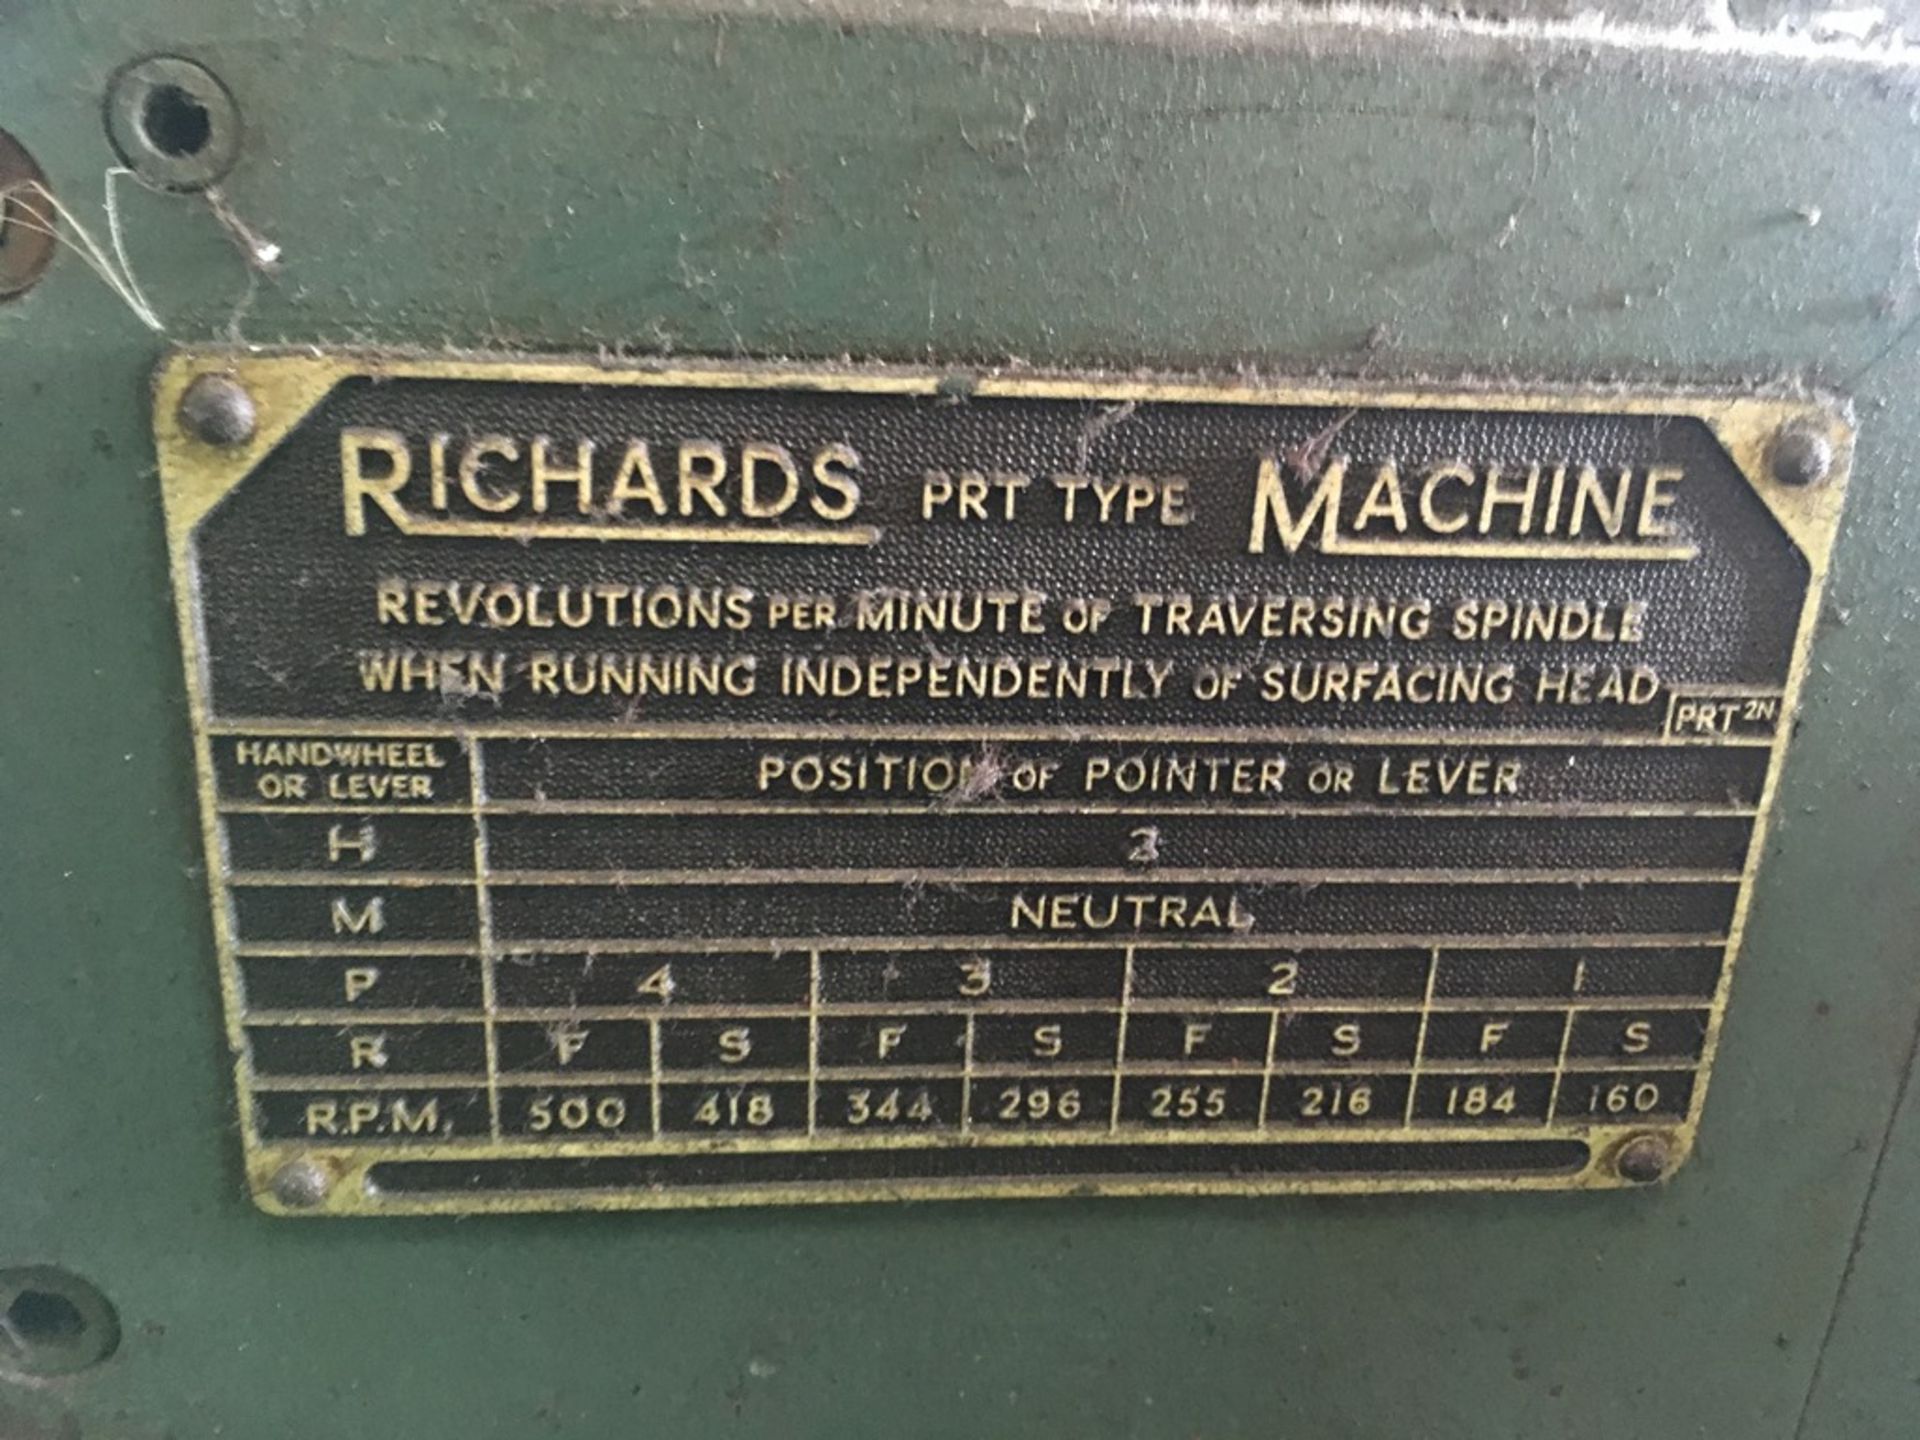 Richards horizontal borer 36" bed no. 7697 chain driven with Digipac control (Electrical disconne... - Image 6 of 17